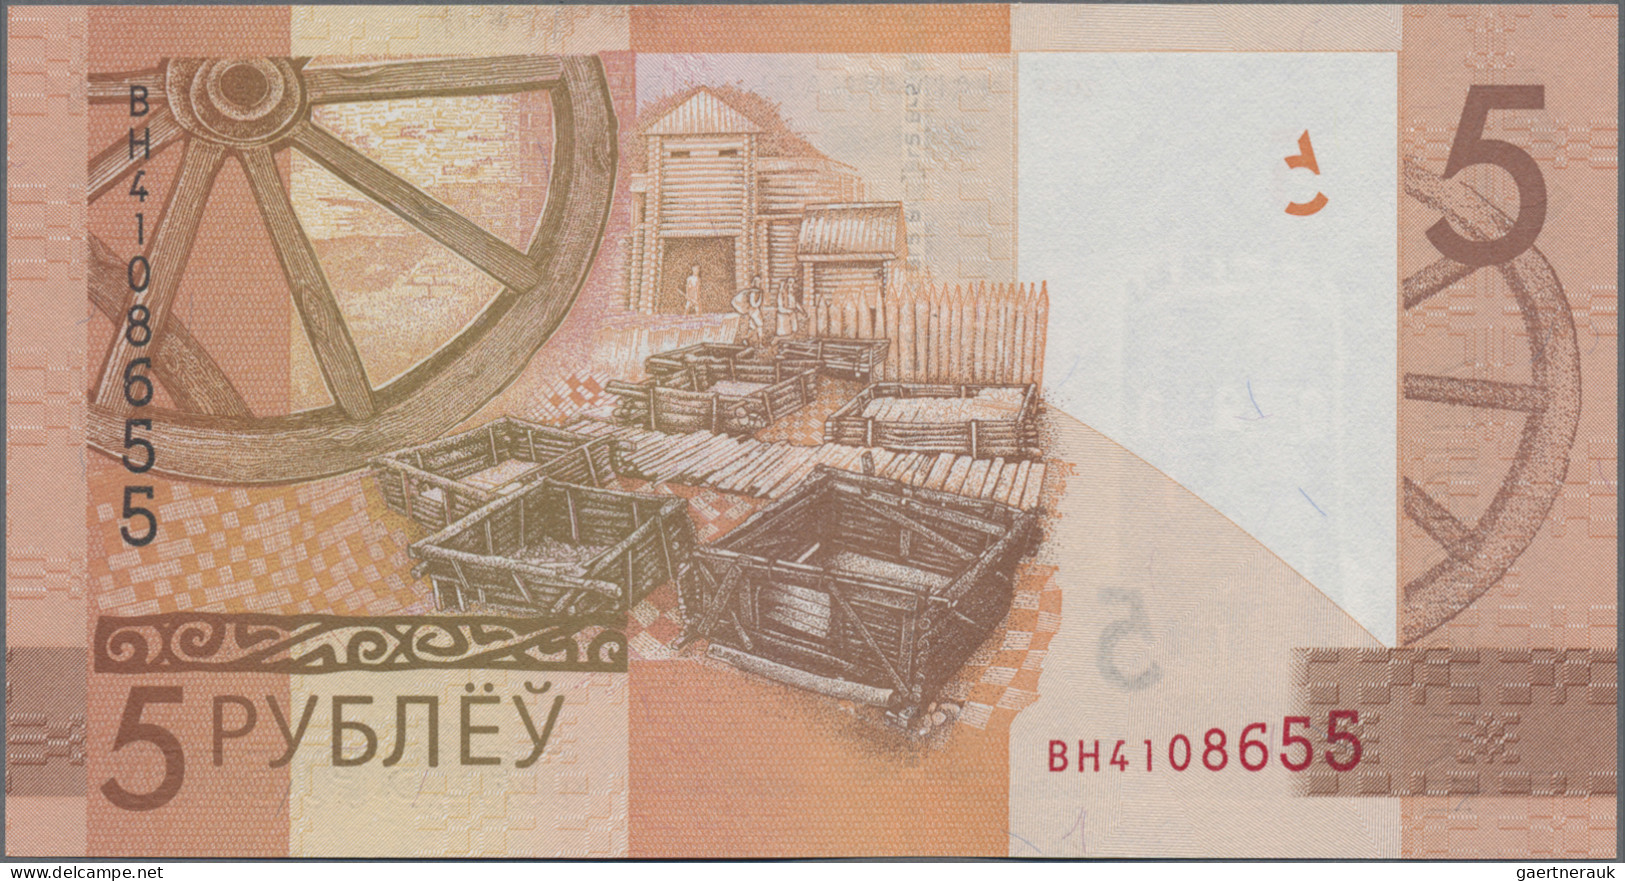 Belarus: National Bank of Belarus, set with 7 banknotes, series 2019-2022, with